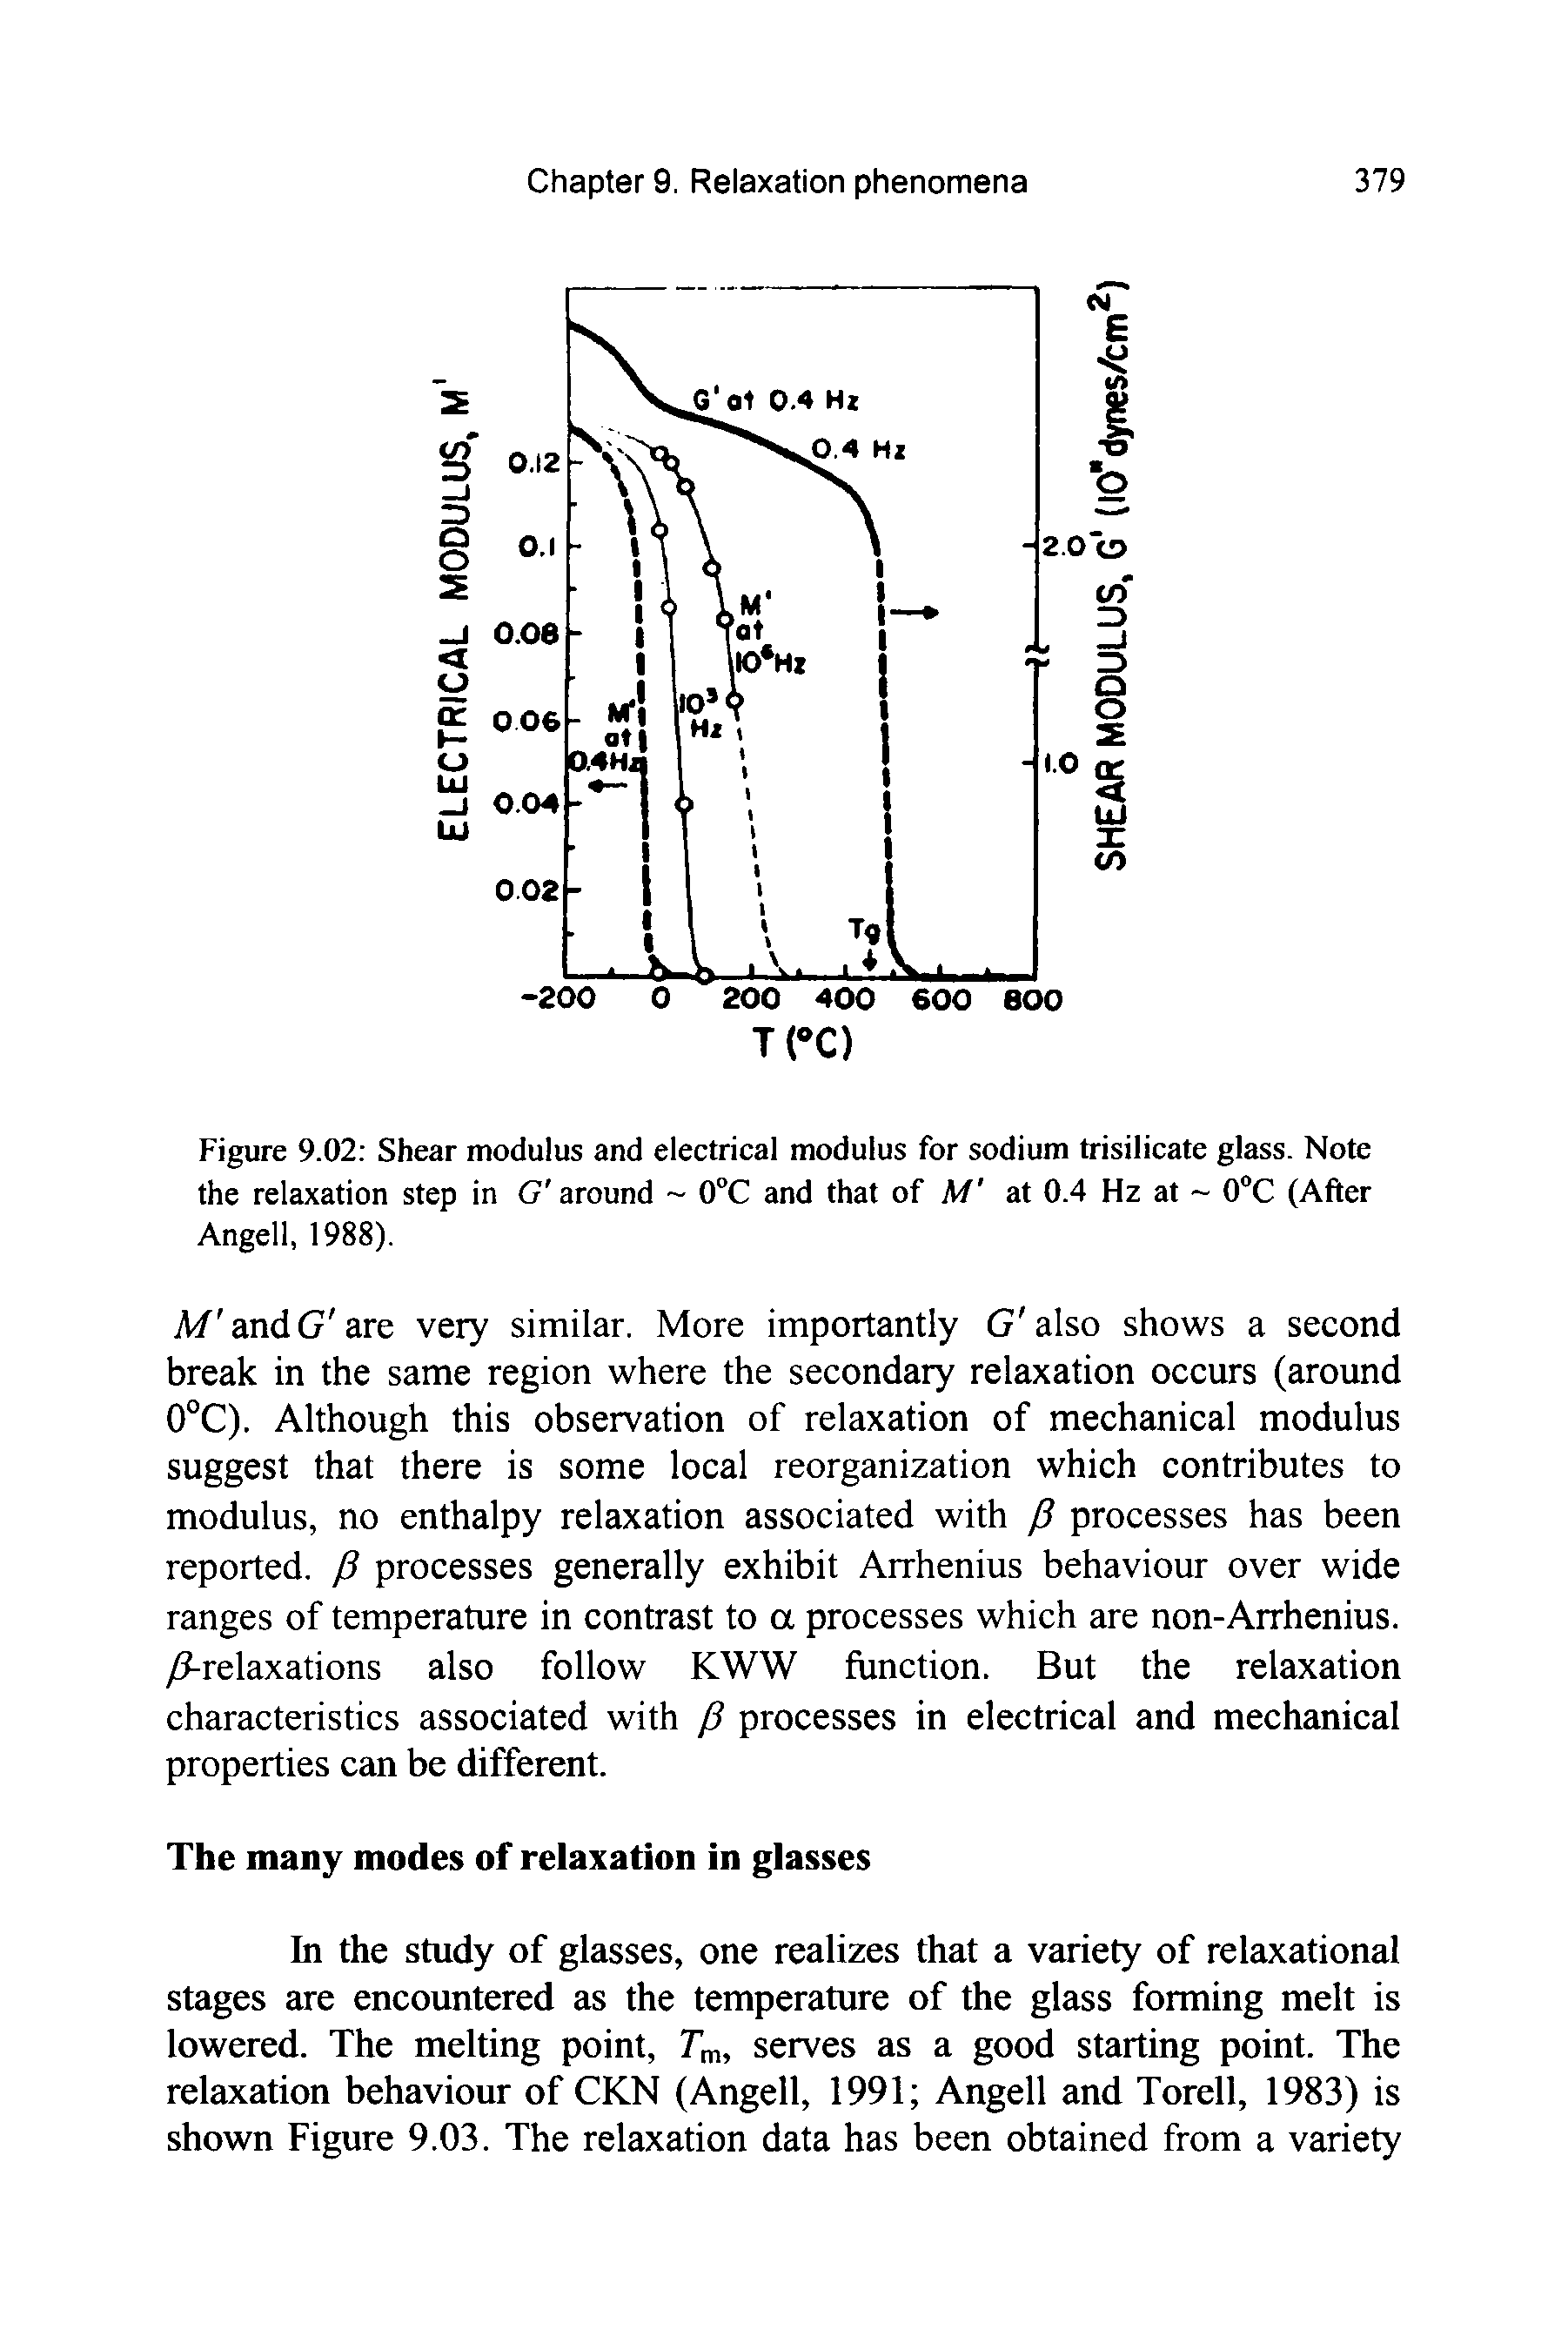 Figure 9.02 Shear modulus and electrical modulus for sodium trisilicate glass. Note the relaxation step in G around 0 C and that of M at 0.4 Hz at 0 C (After Angell, 1988).